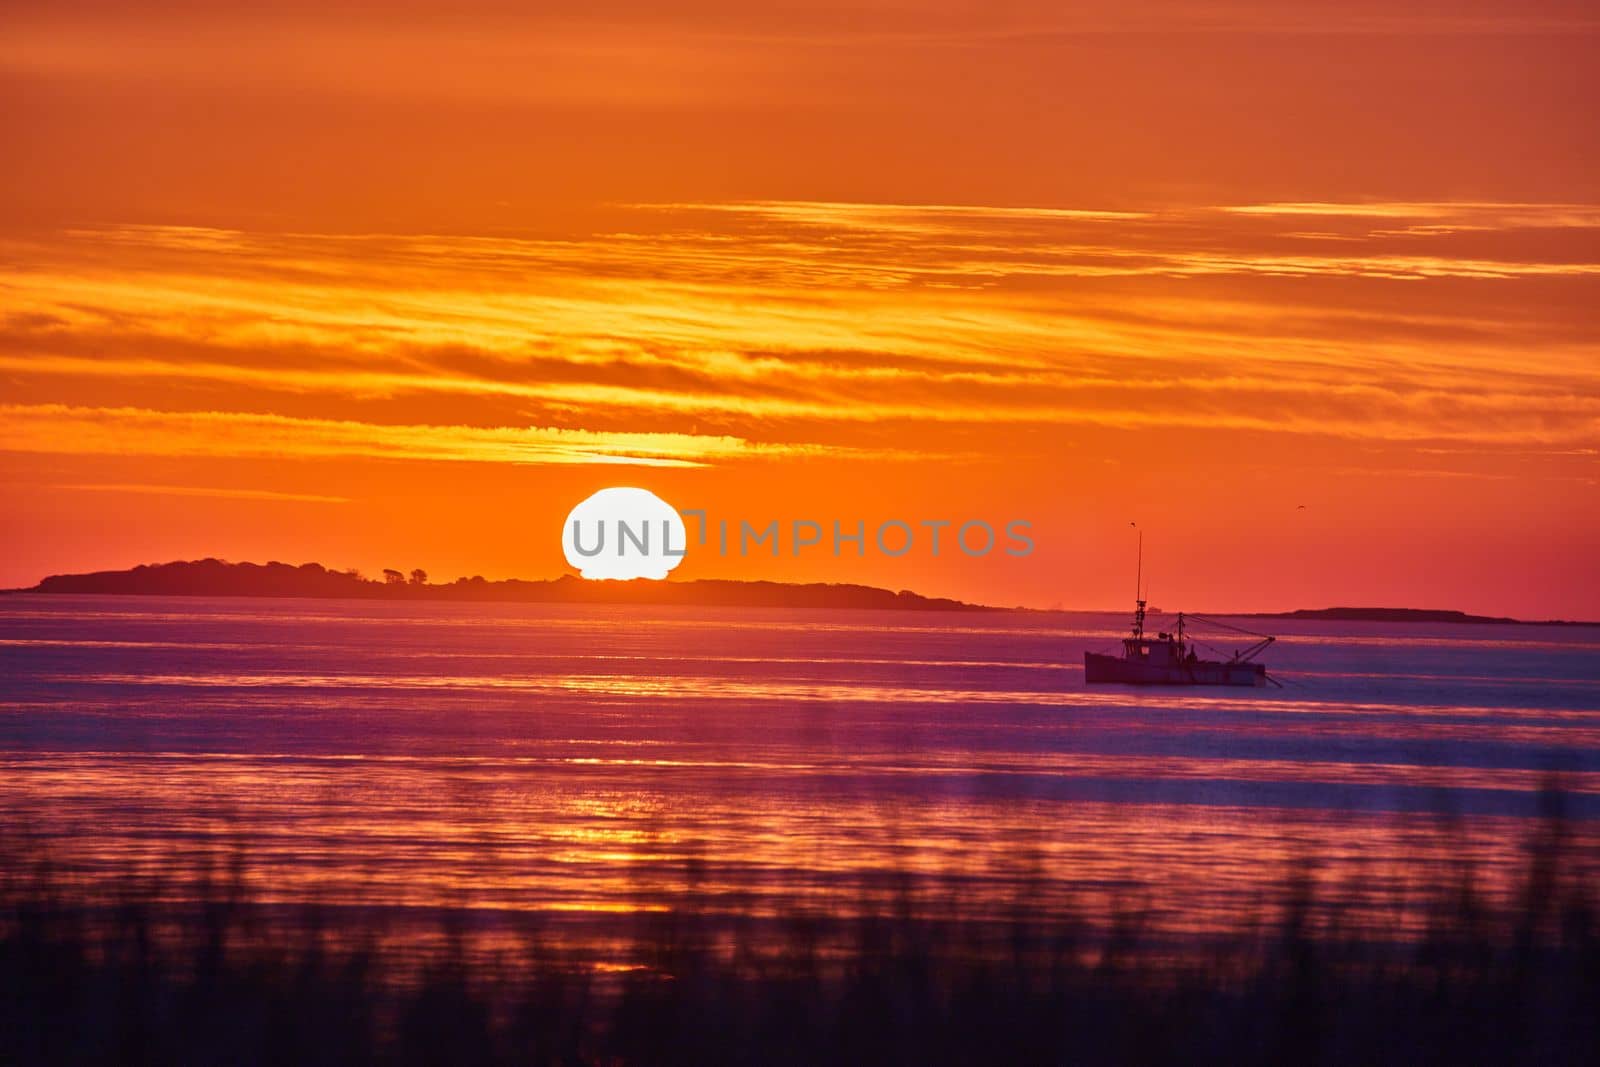 Sunrise with golden light on ocean east coast with grassy coast in foreground and fishing ship in distance by njproductions